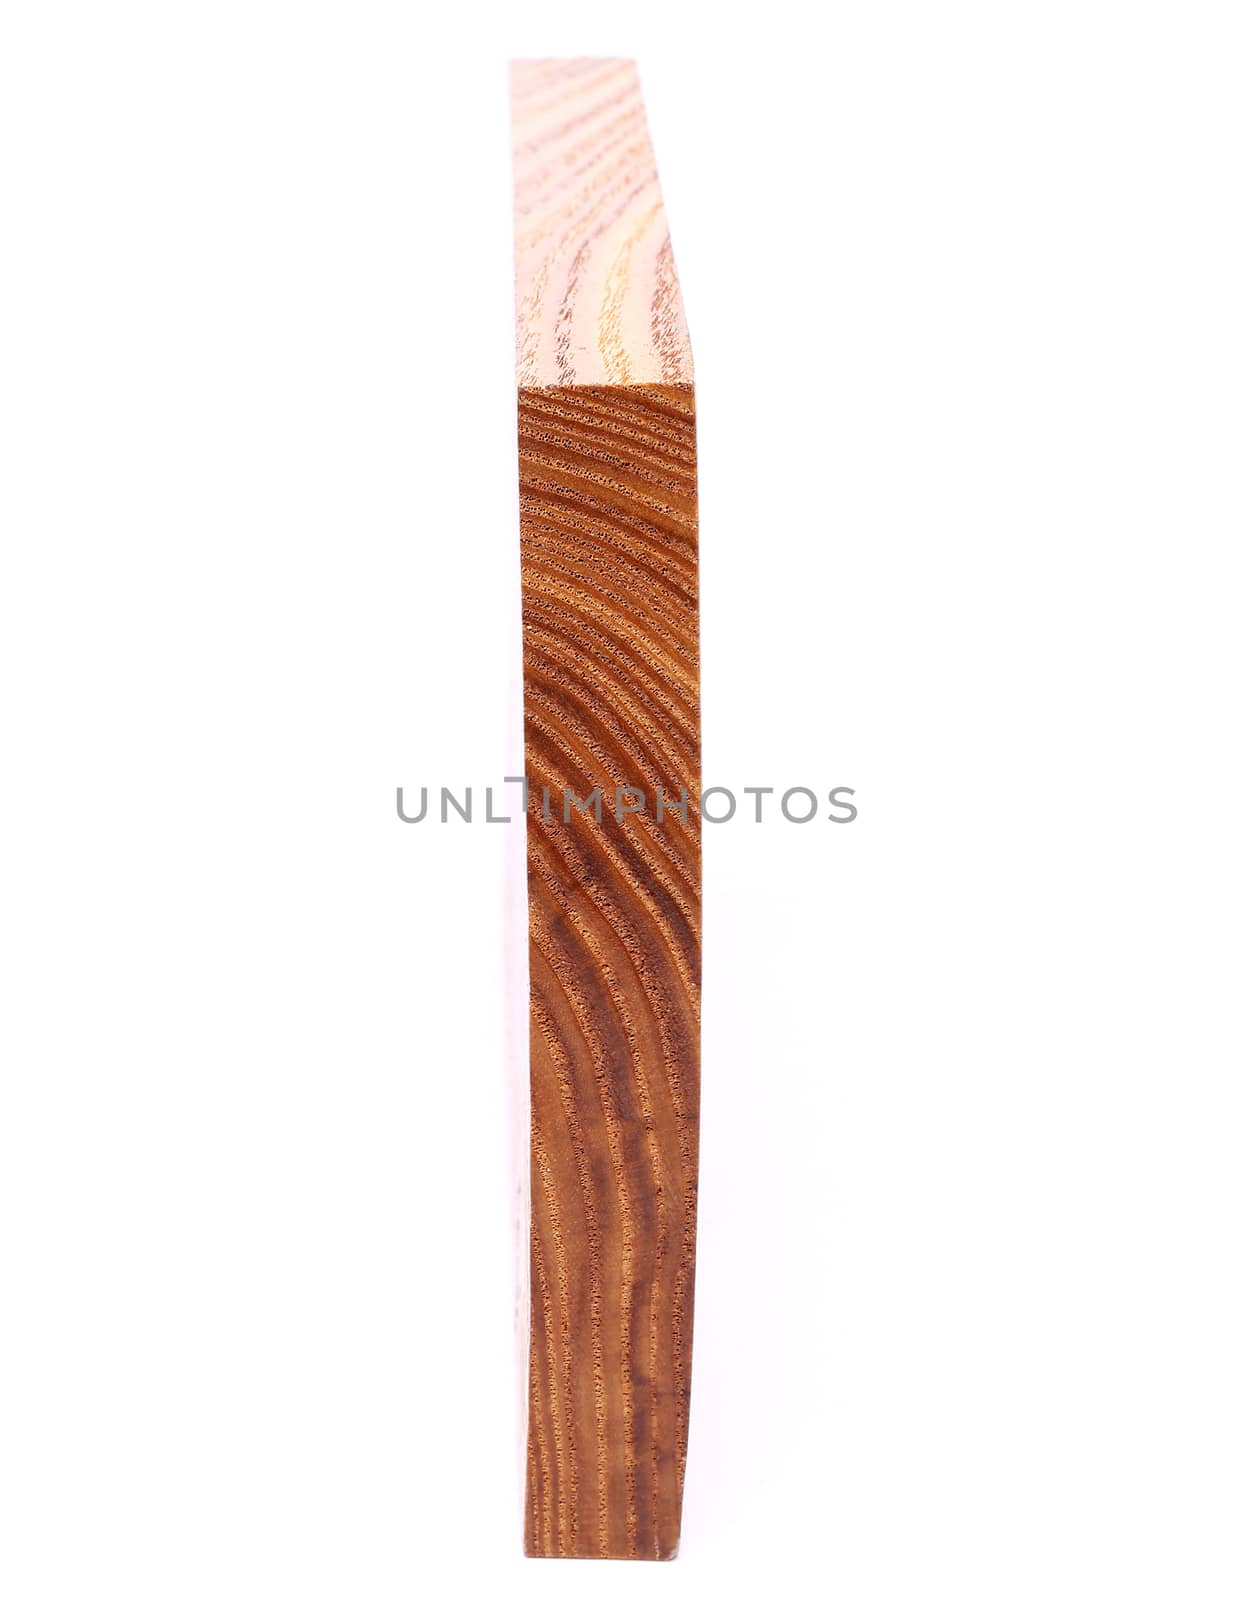 A wooden plank close-up is located on the white background